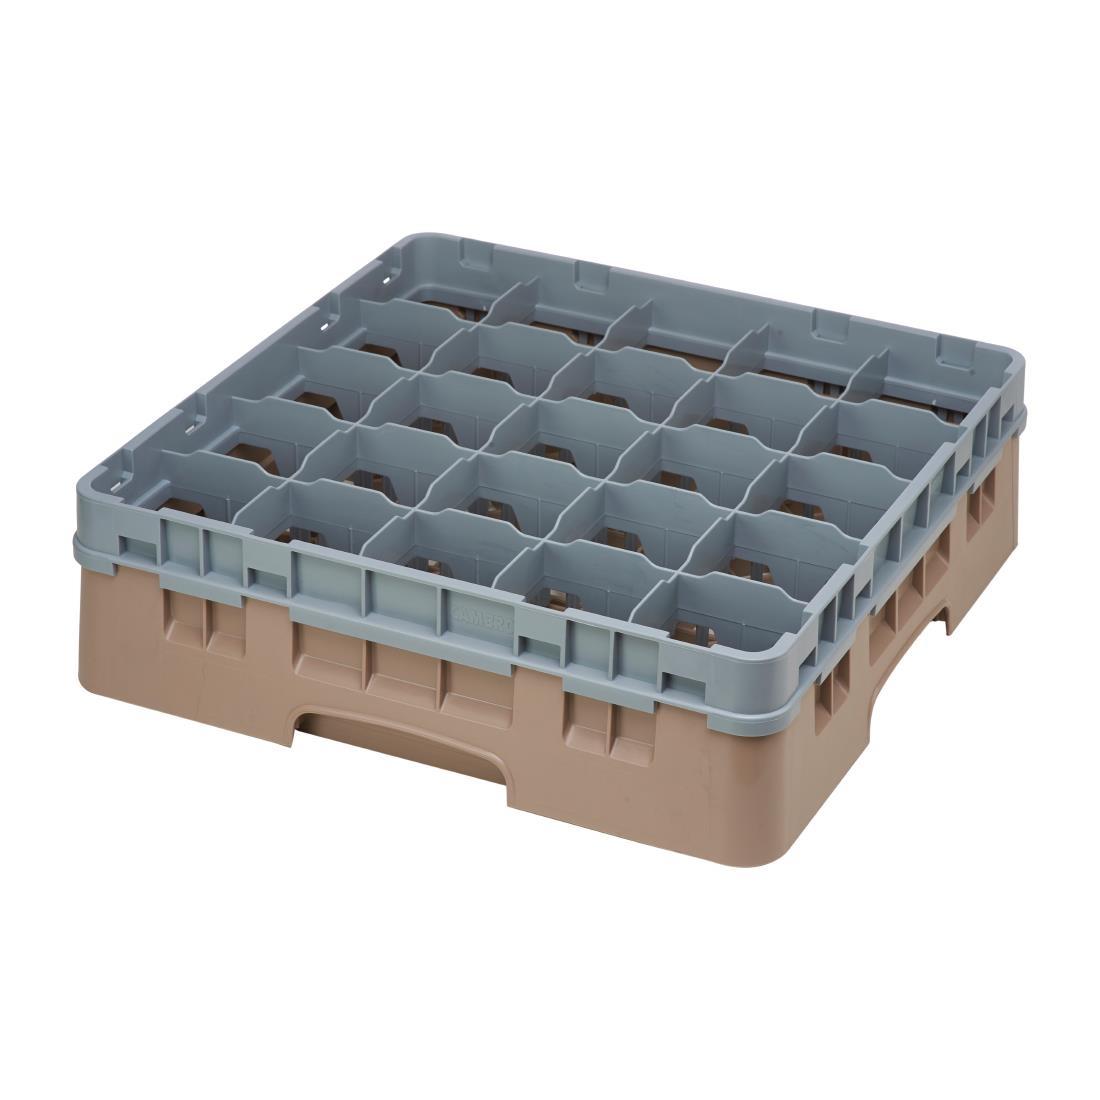 Cambro Camrack Beige 25 Compartments Max Glass Height 114mm - FD070  - 1